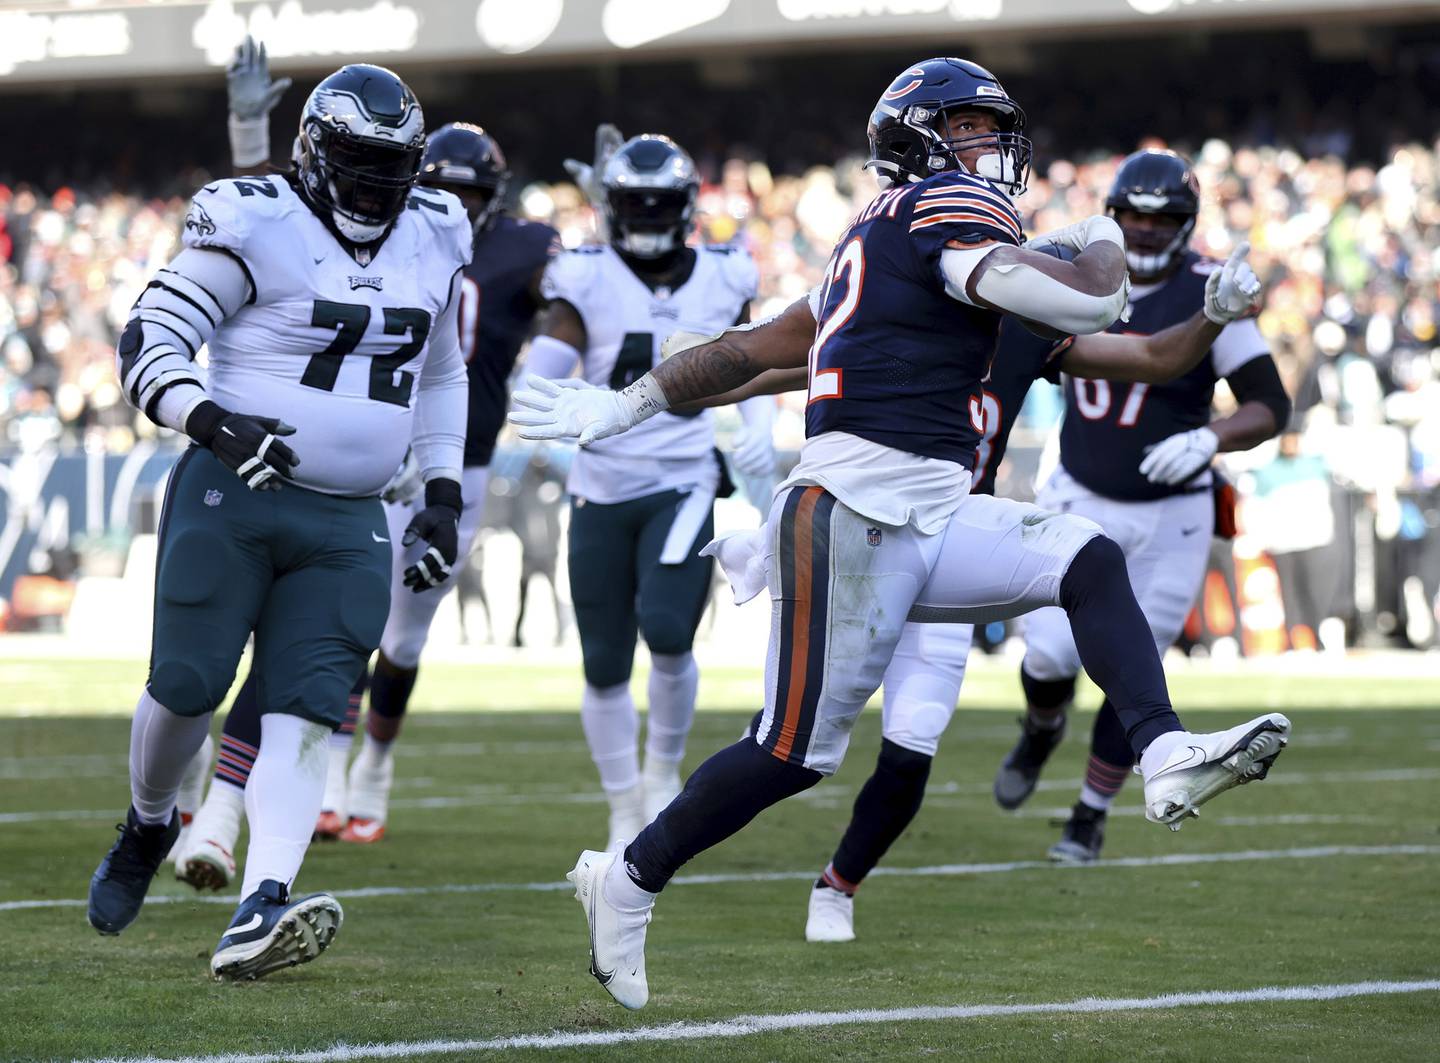 Bears running back David Montgomery runs in for a touchdown in the second quarter against the Eagles at Soldier Field on Dec. 18, 2022.